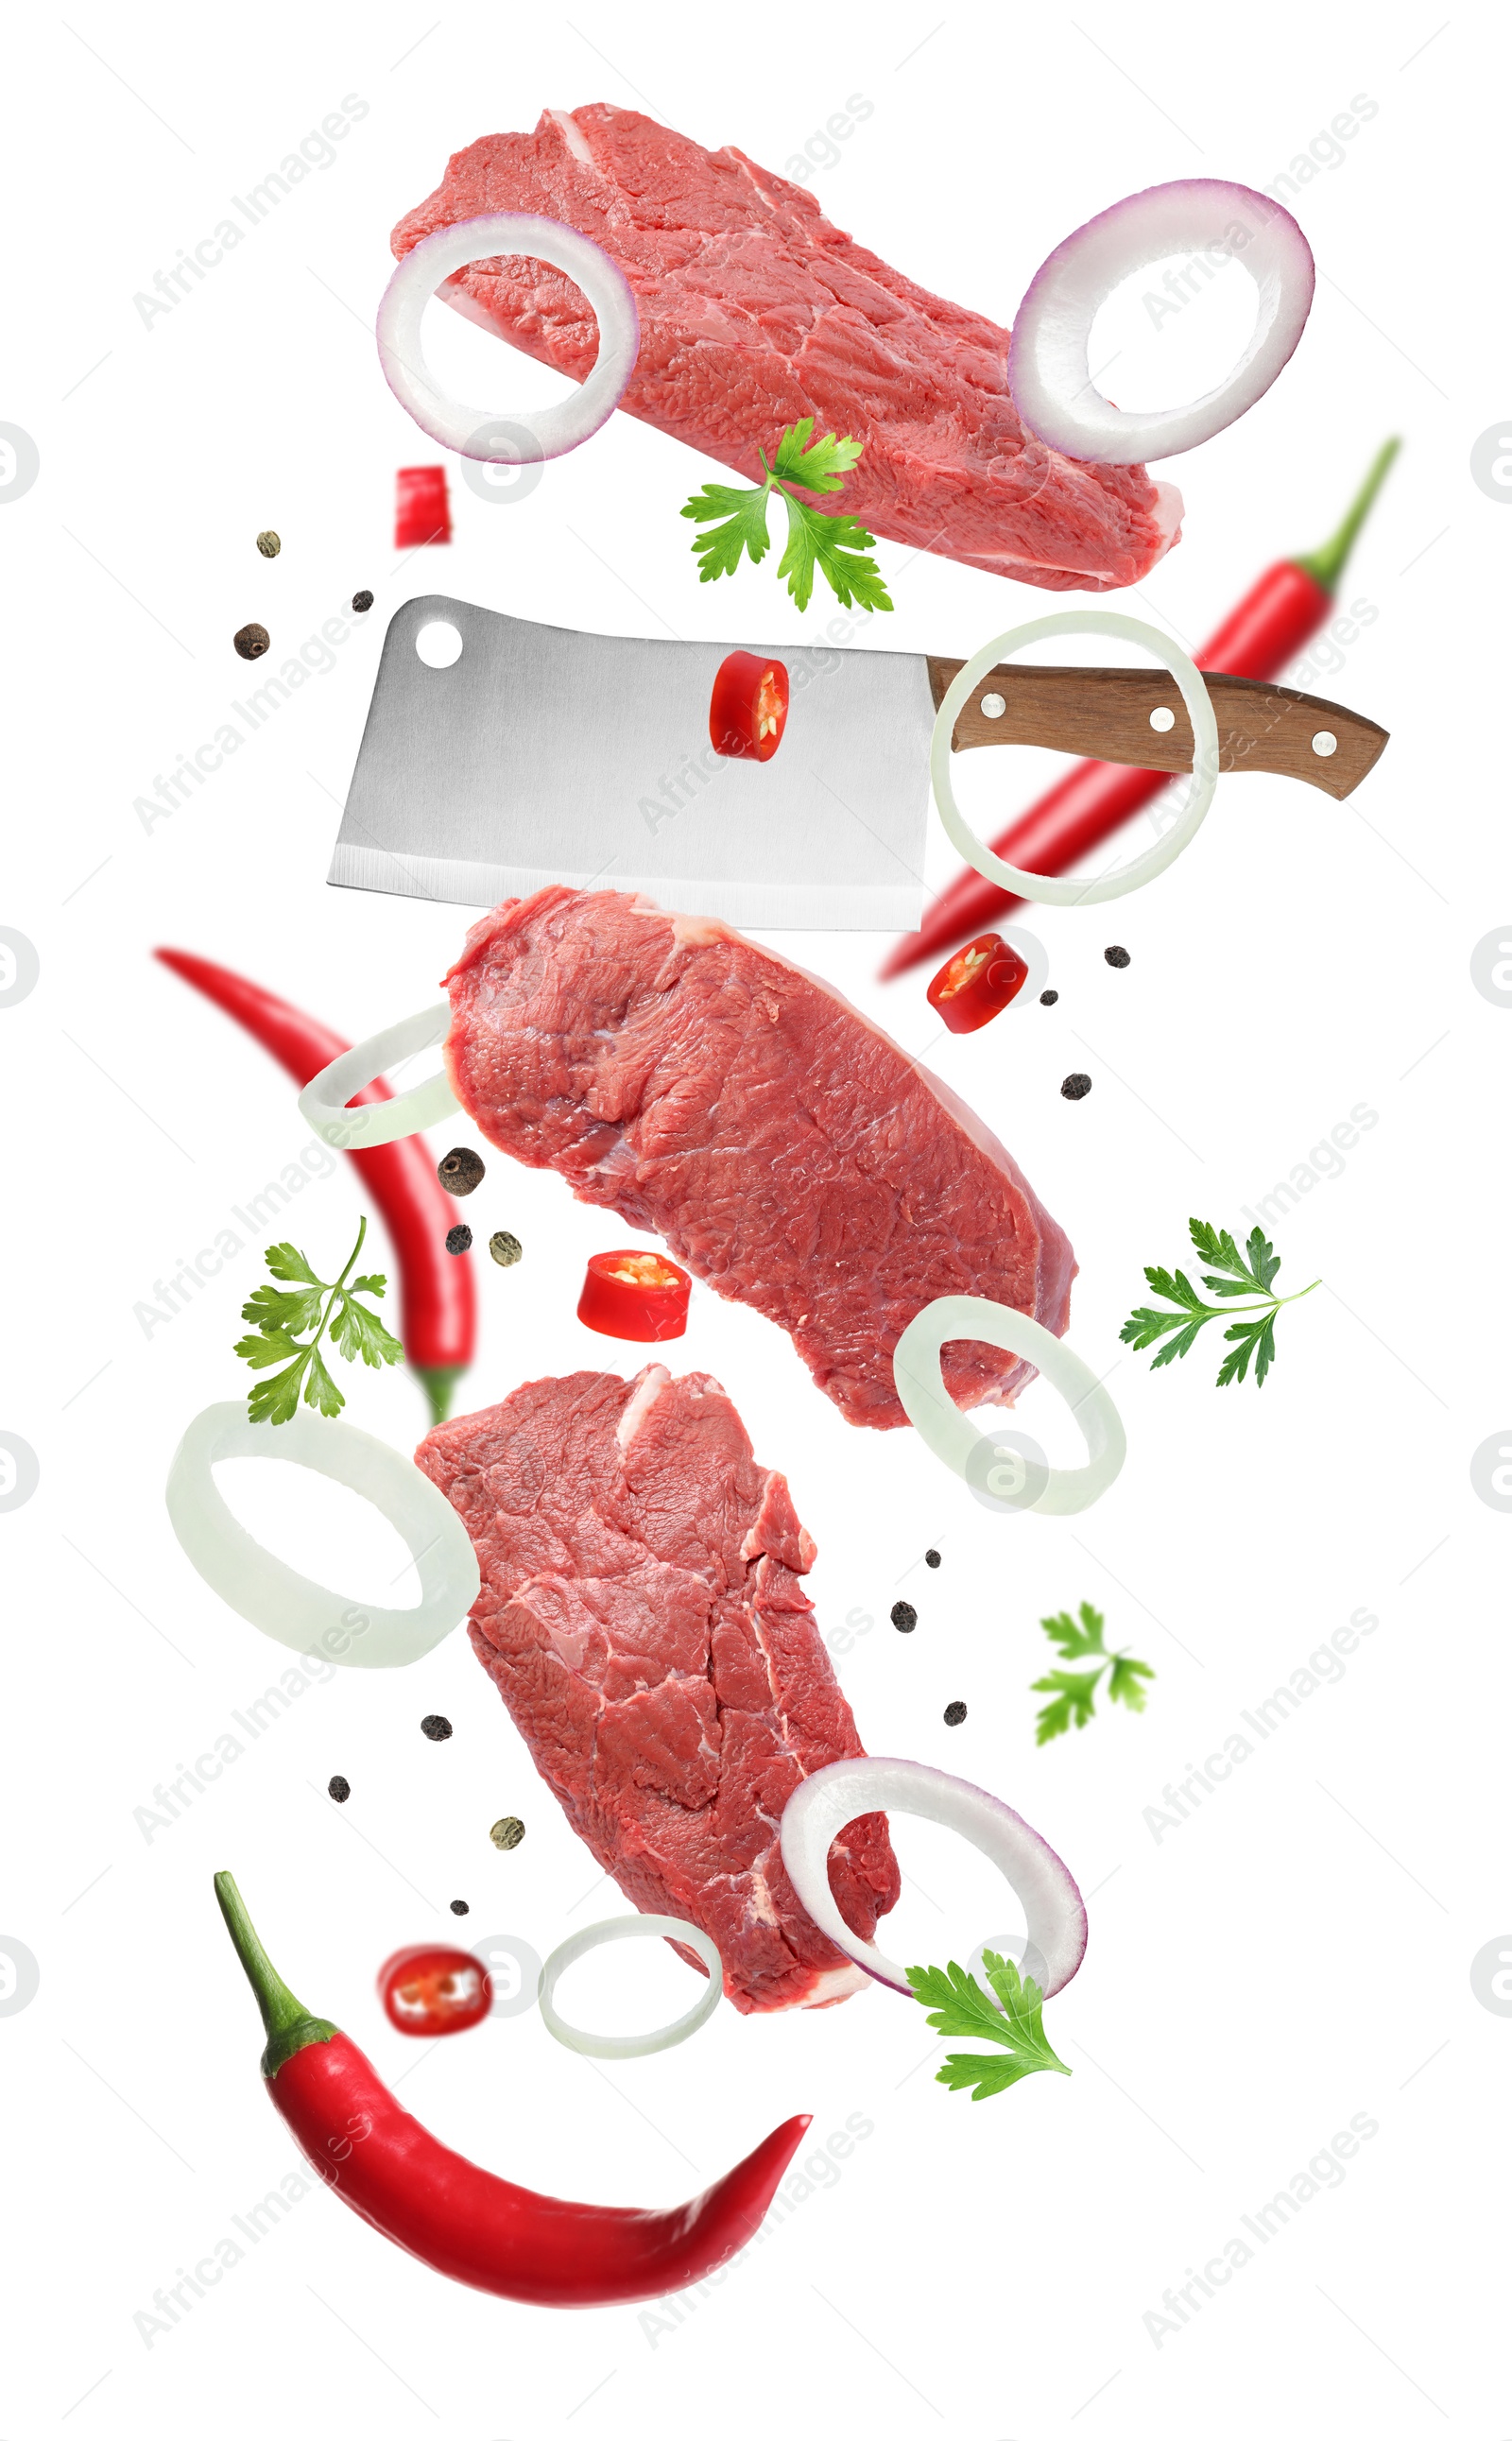 Image of Beef meat, different spices and cleaver knife falling on white background